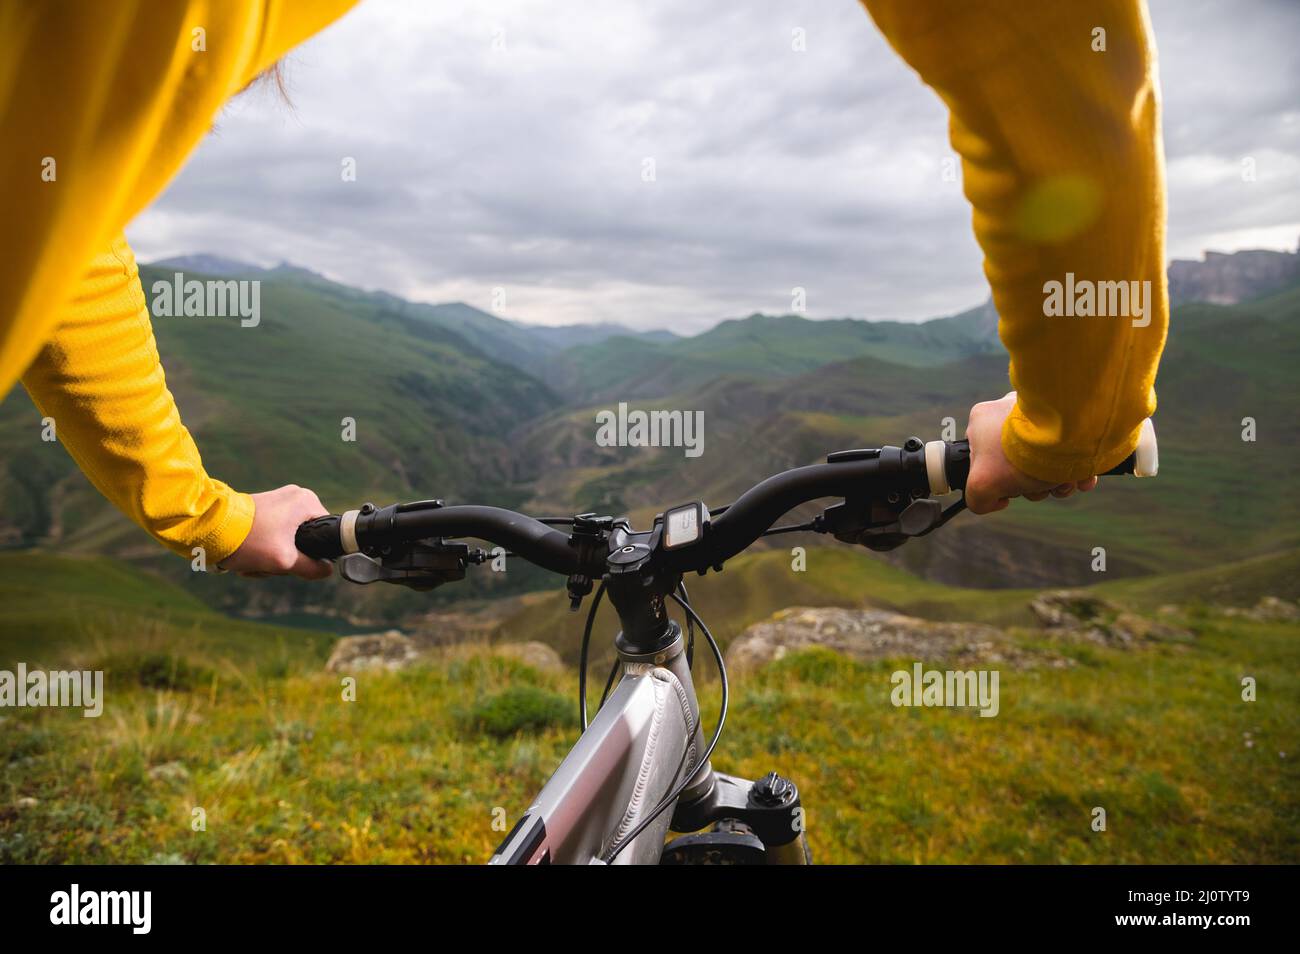 A close-up of the girl's hand cyclist on the handlebars of a mountain bike against the backdrop of epic rocks and mountains. Mou Stock Photo